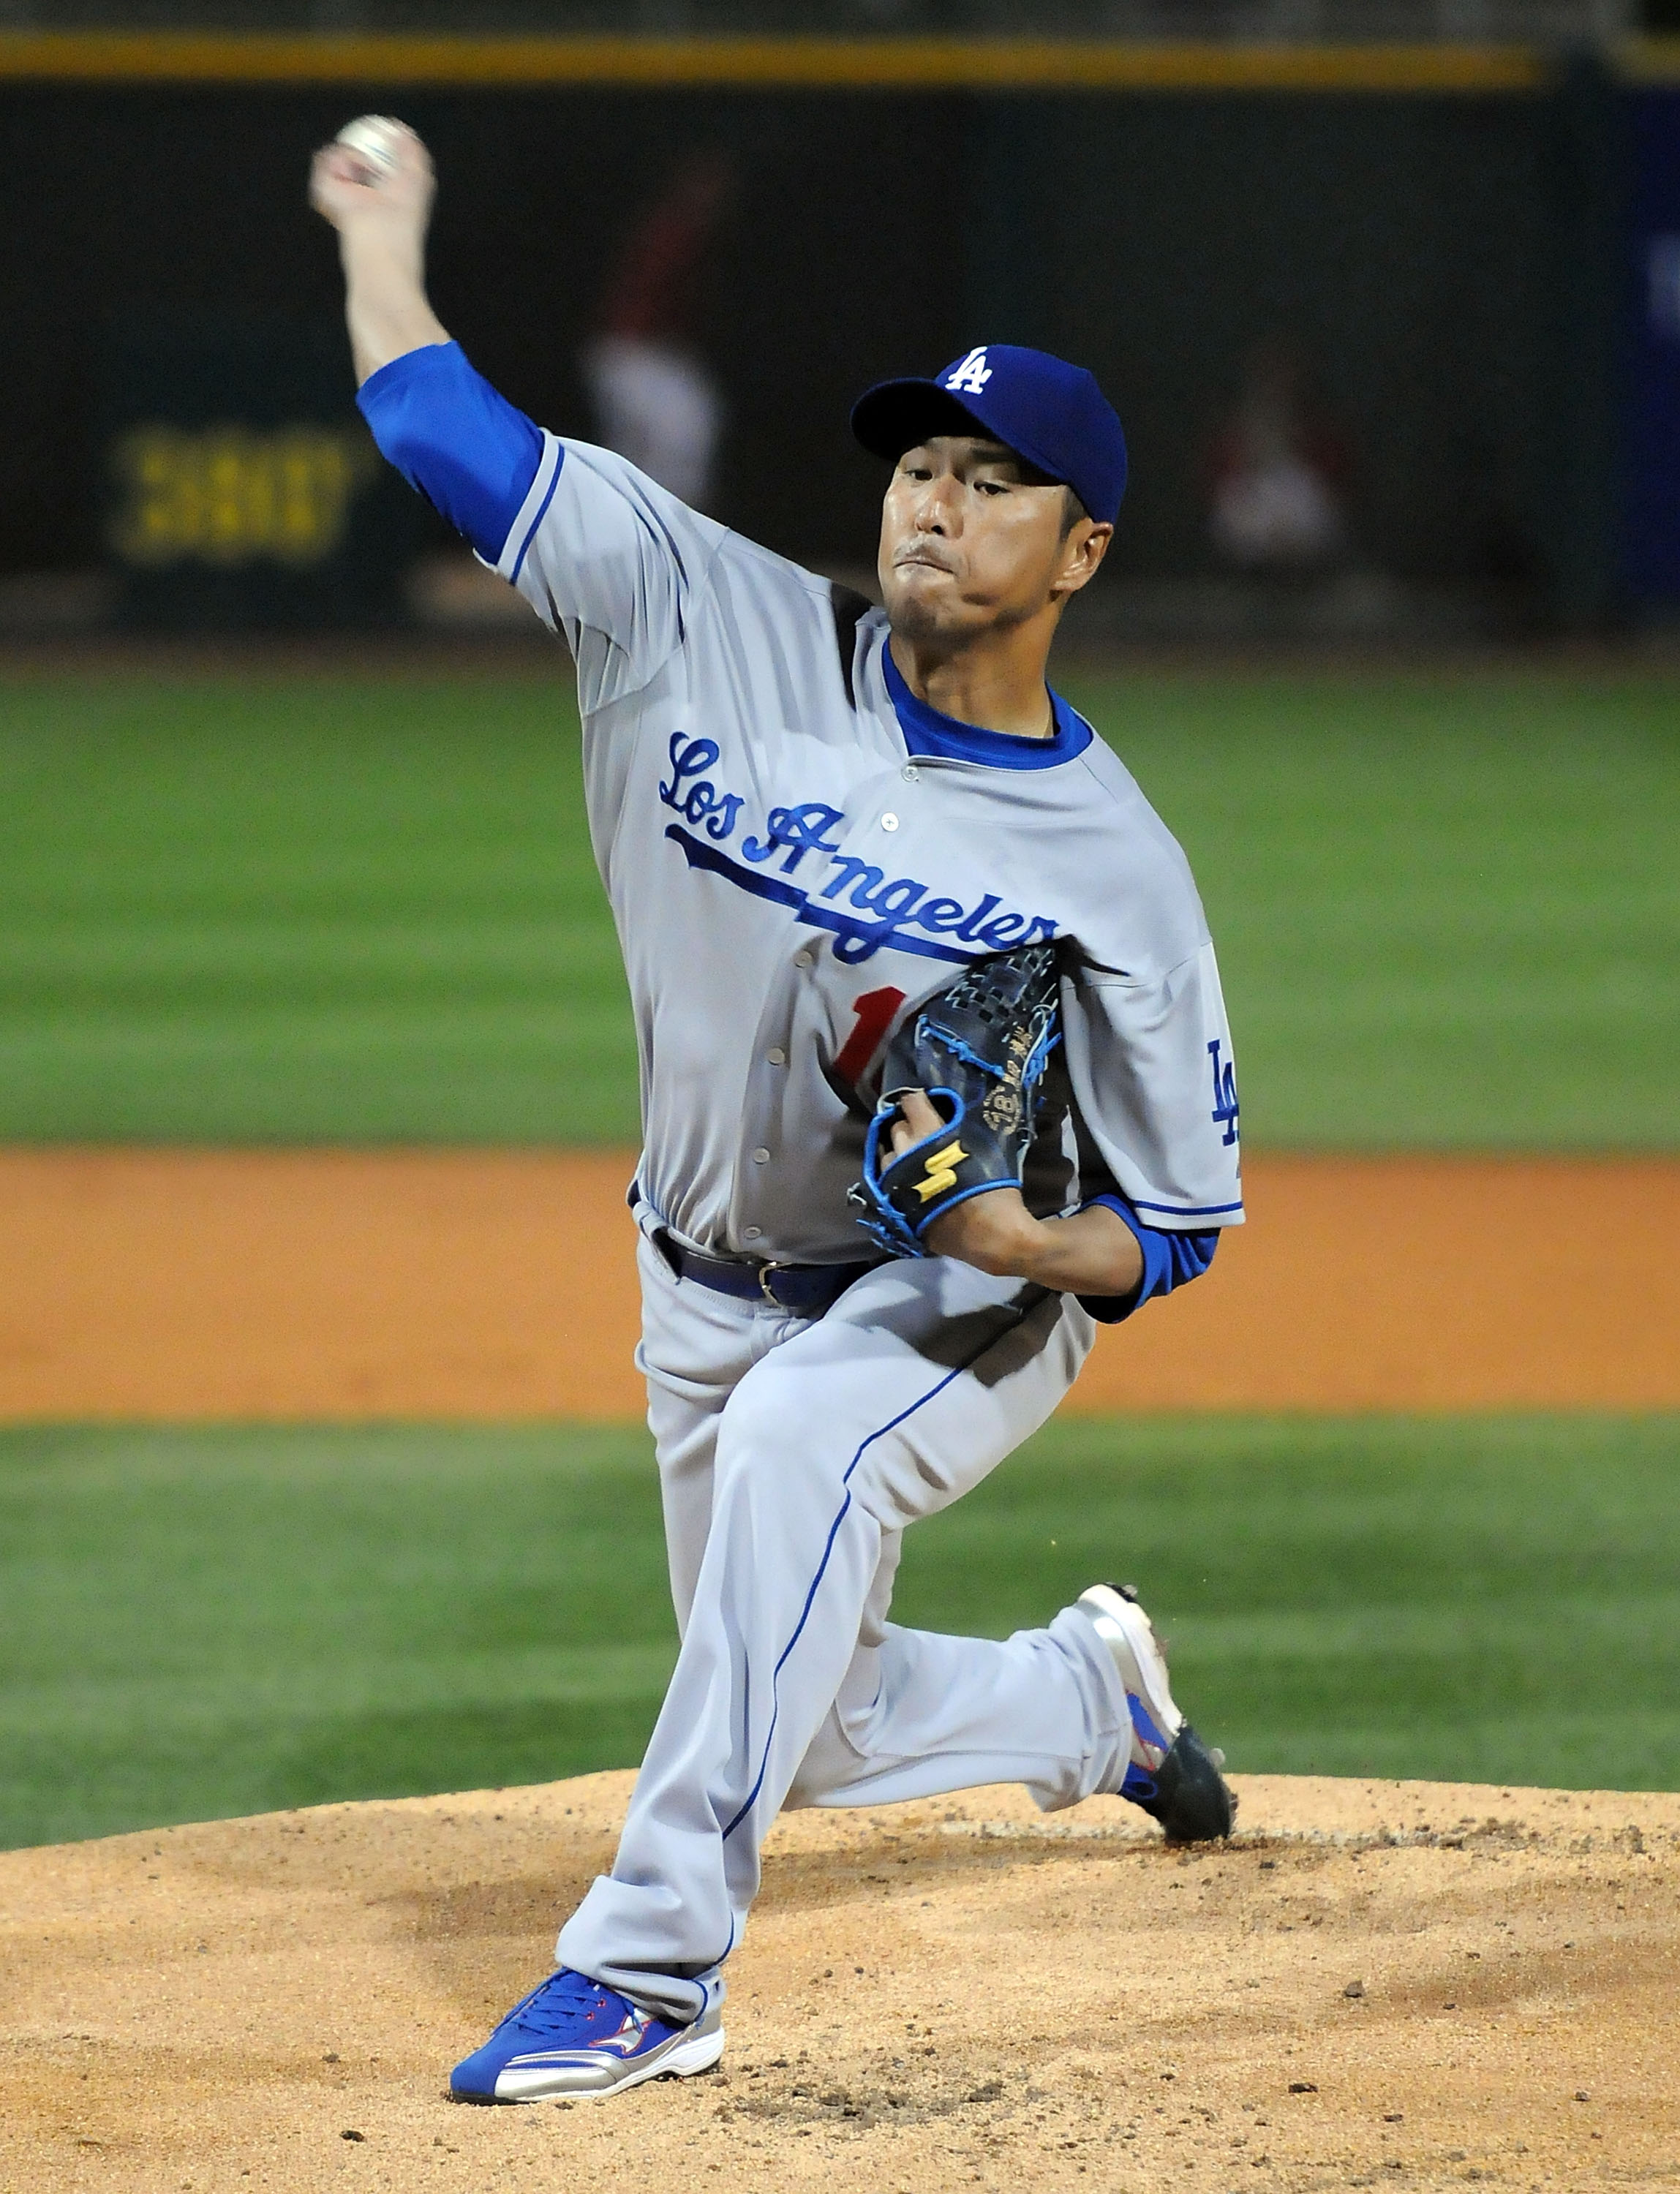 GOODYEAR, AZ - MARCH 03:  Hiroki Kuroda #18 of the Los Angeles Dodgers delivers a pitch against the Cincinnati Reds at Goodyear Ballpark on March 3, 2011 in Goodyear, Arizona.  (Photo by Norm Hall/Getty Images)